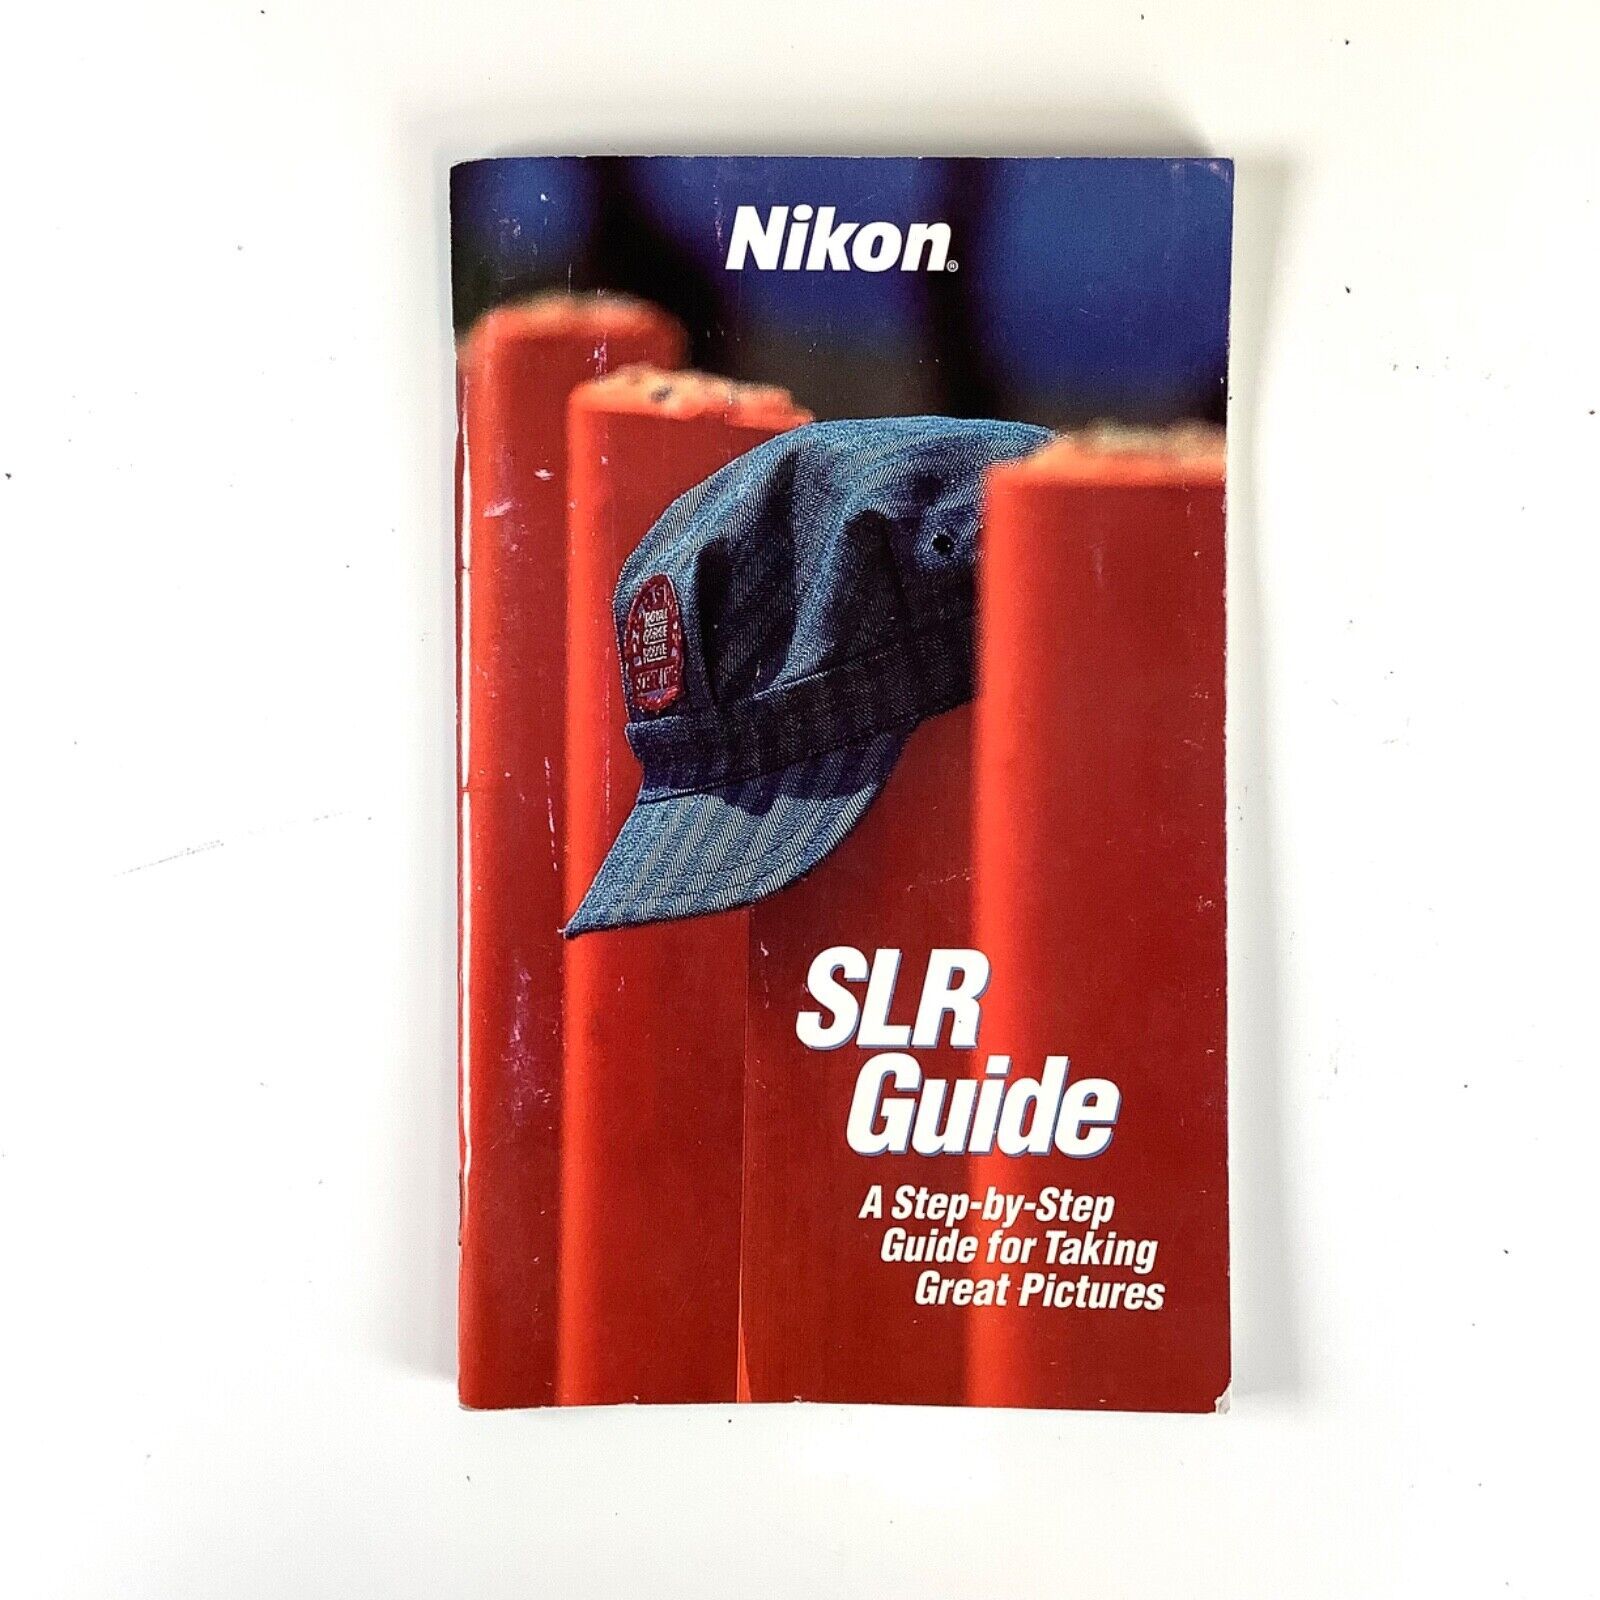 Primary image for Nikon Camera SLR Guide A Step-by-Step Guide for Taking Great Pictures 76 Pages